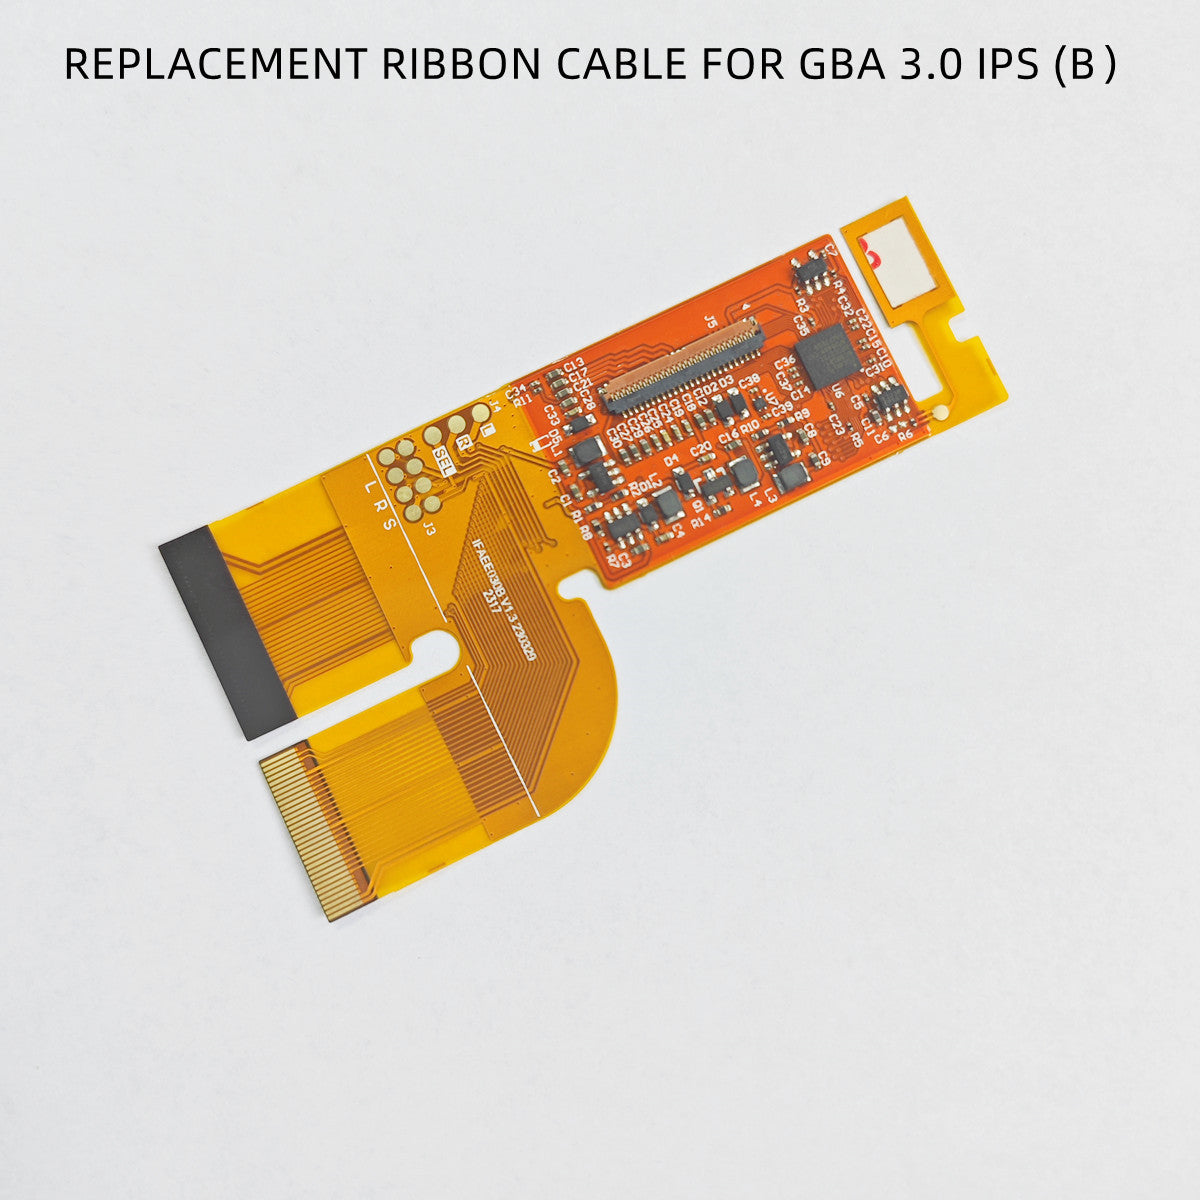 REPLACEMENT RIBBON CABLE FOR GBA 3.0 IPS